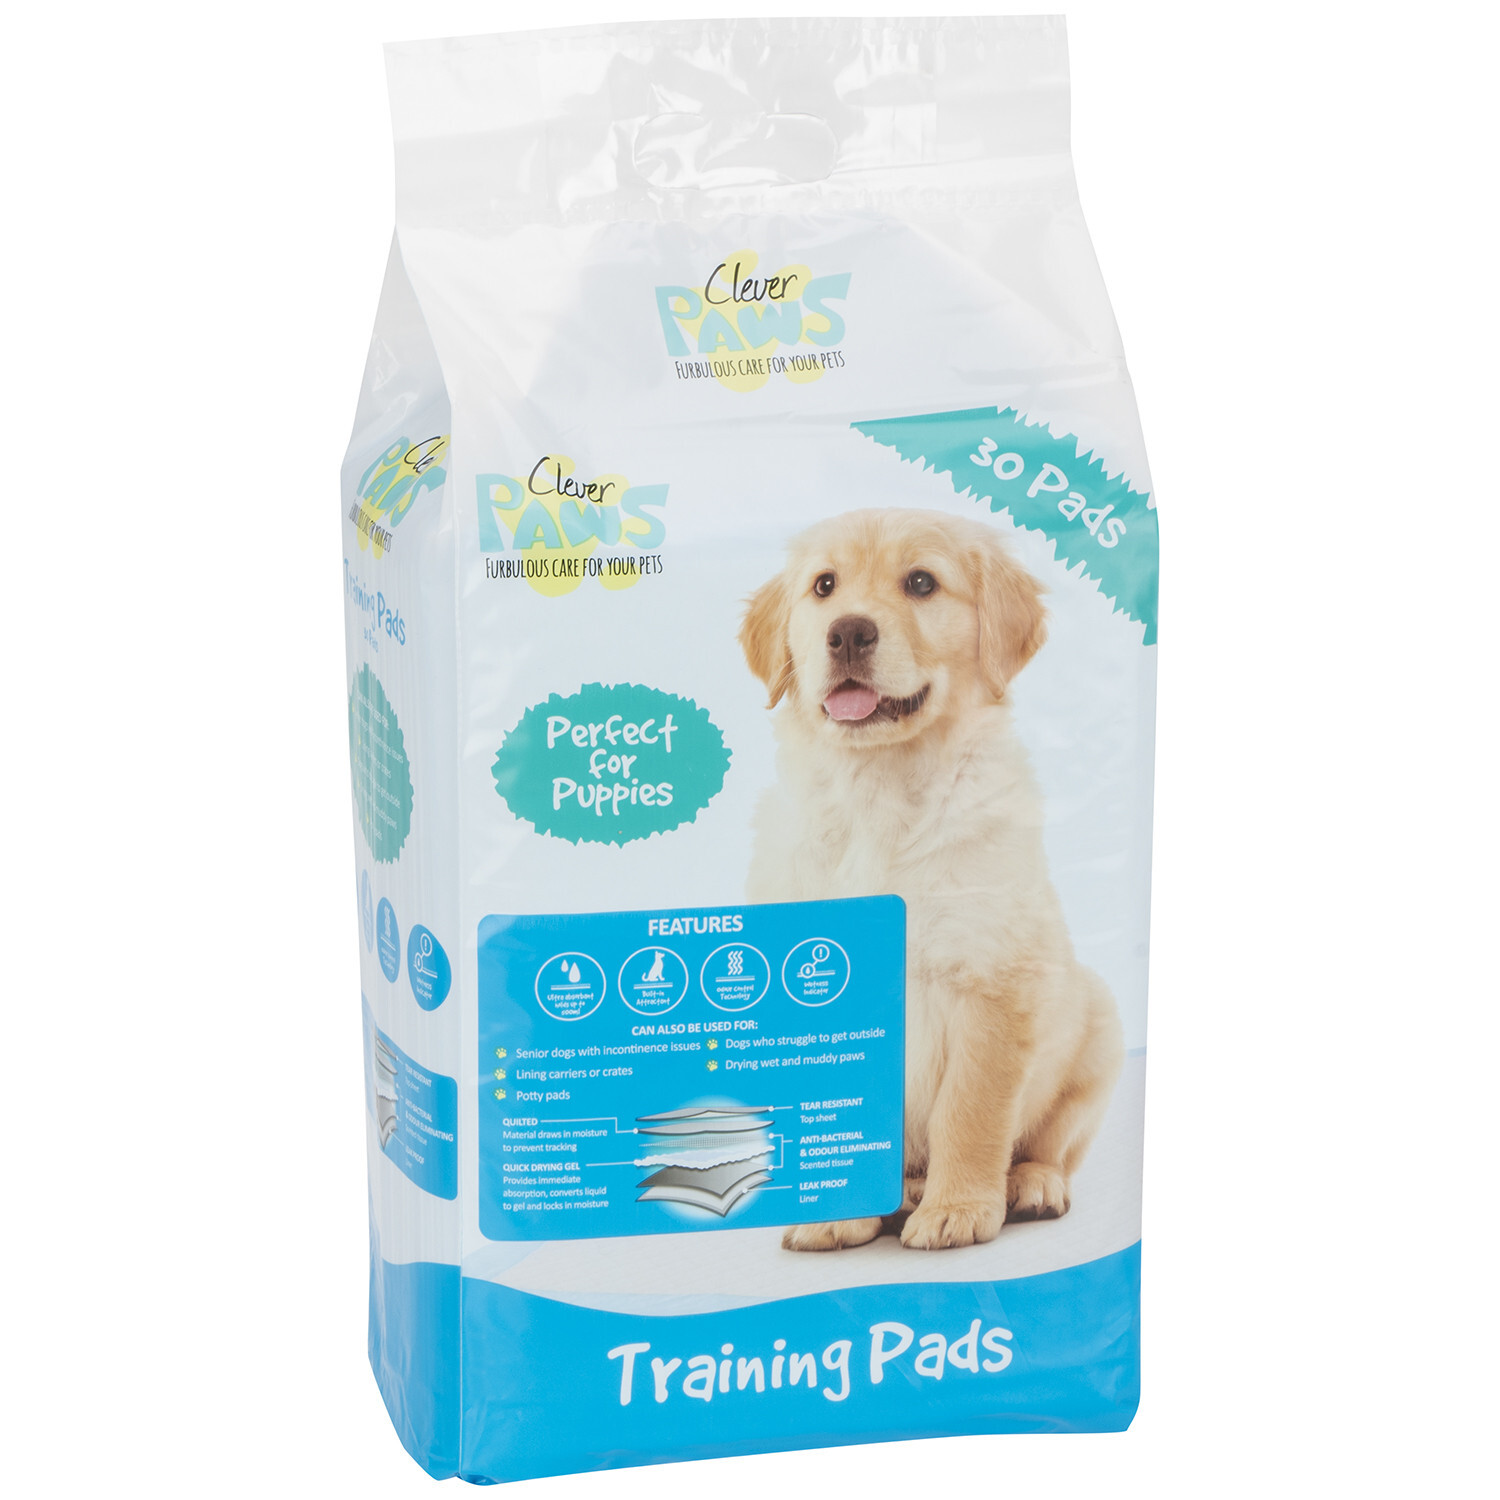 Clever Paws Absorbent and Leak Proof Puppy Training Pads 30 Pack Image